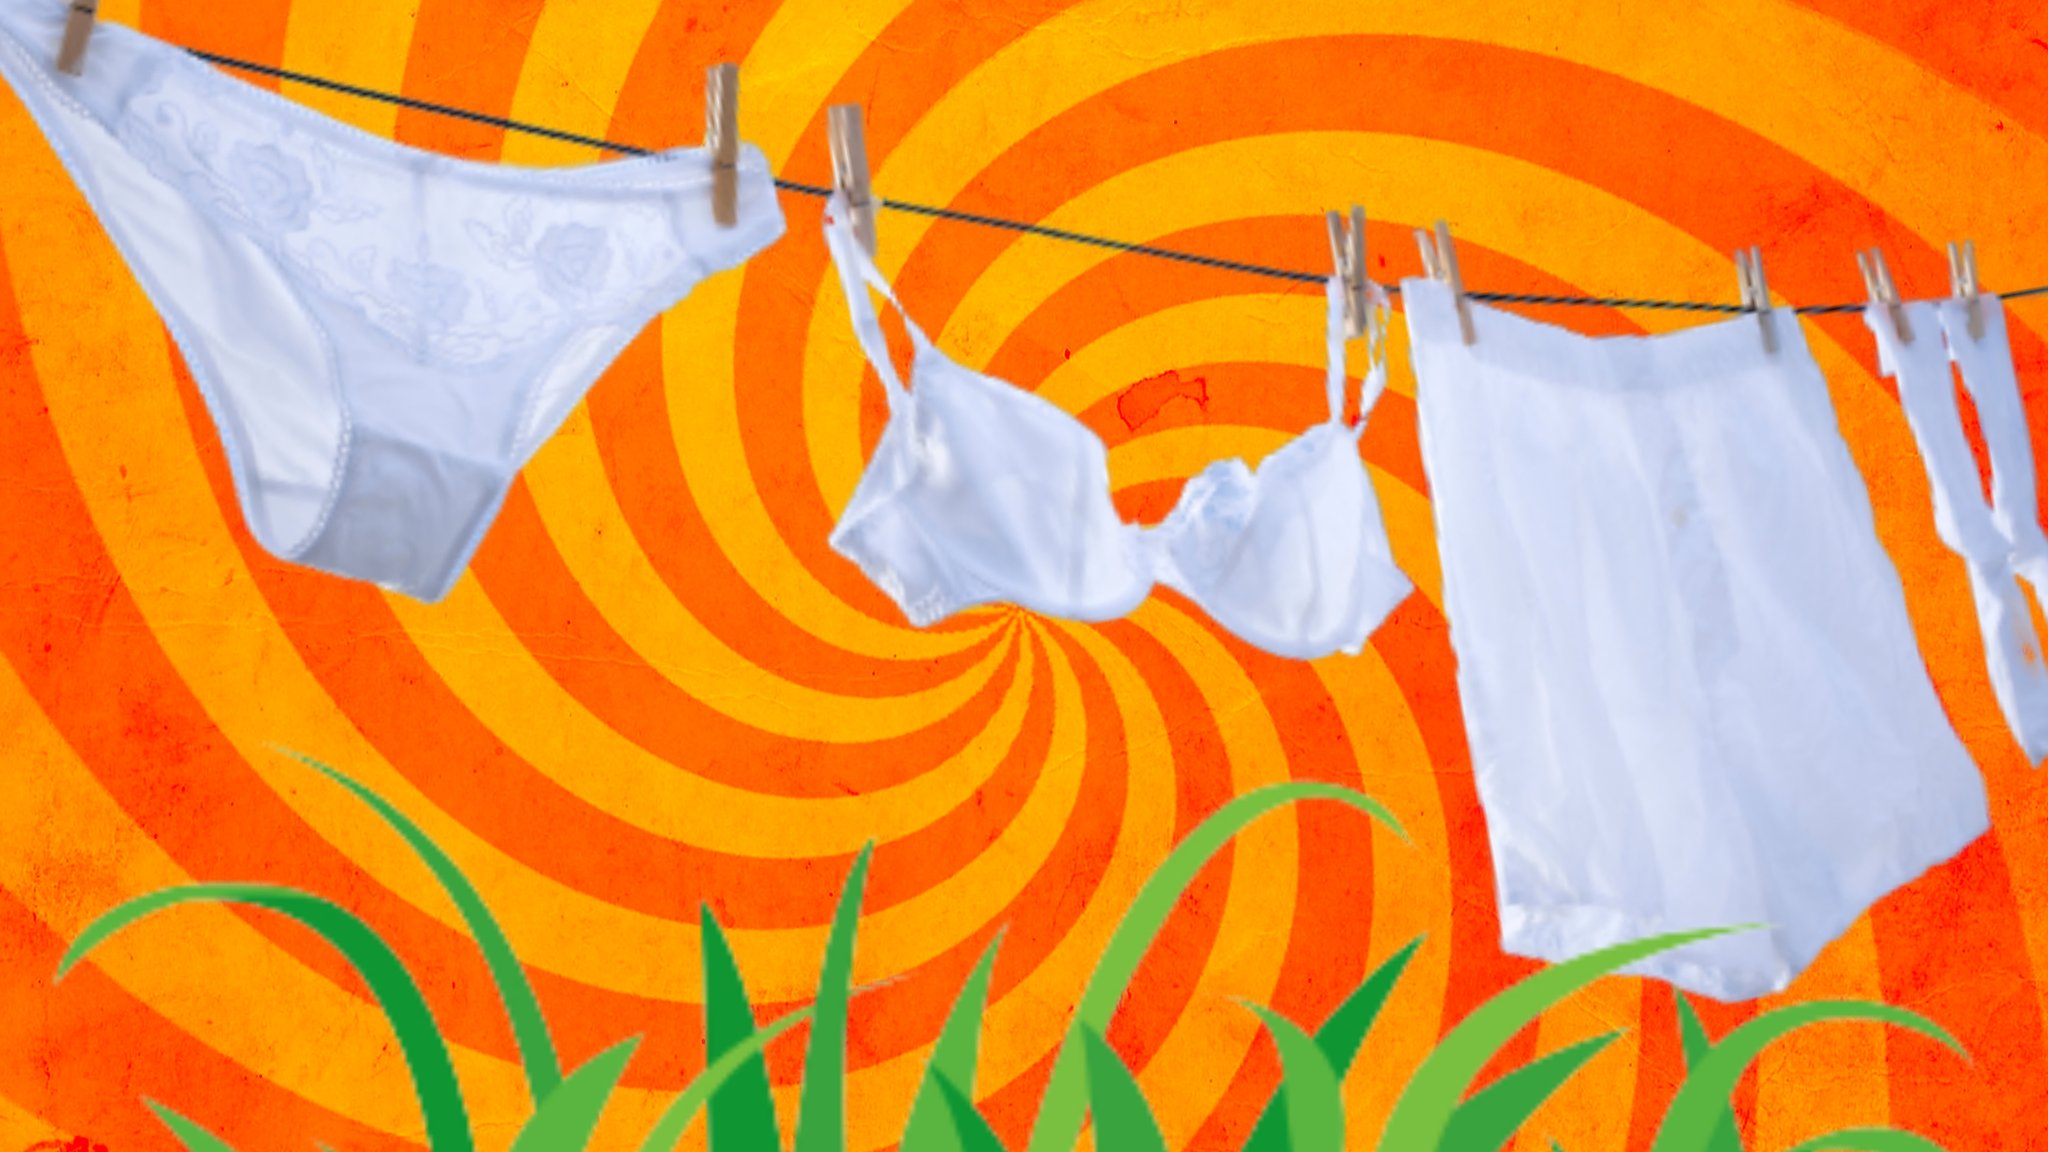 The Weird Gardening Hack That Uses A Pair Of Underwear To Test Soil